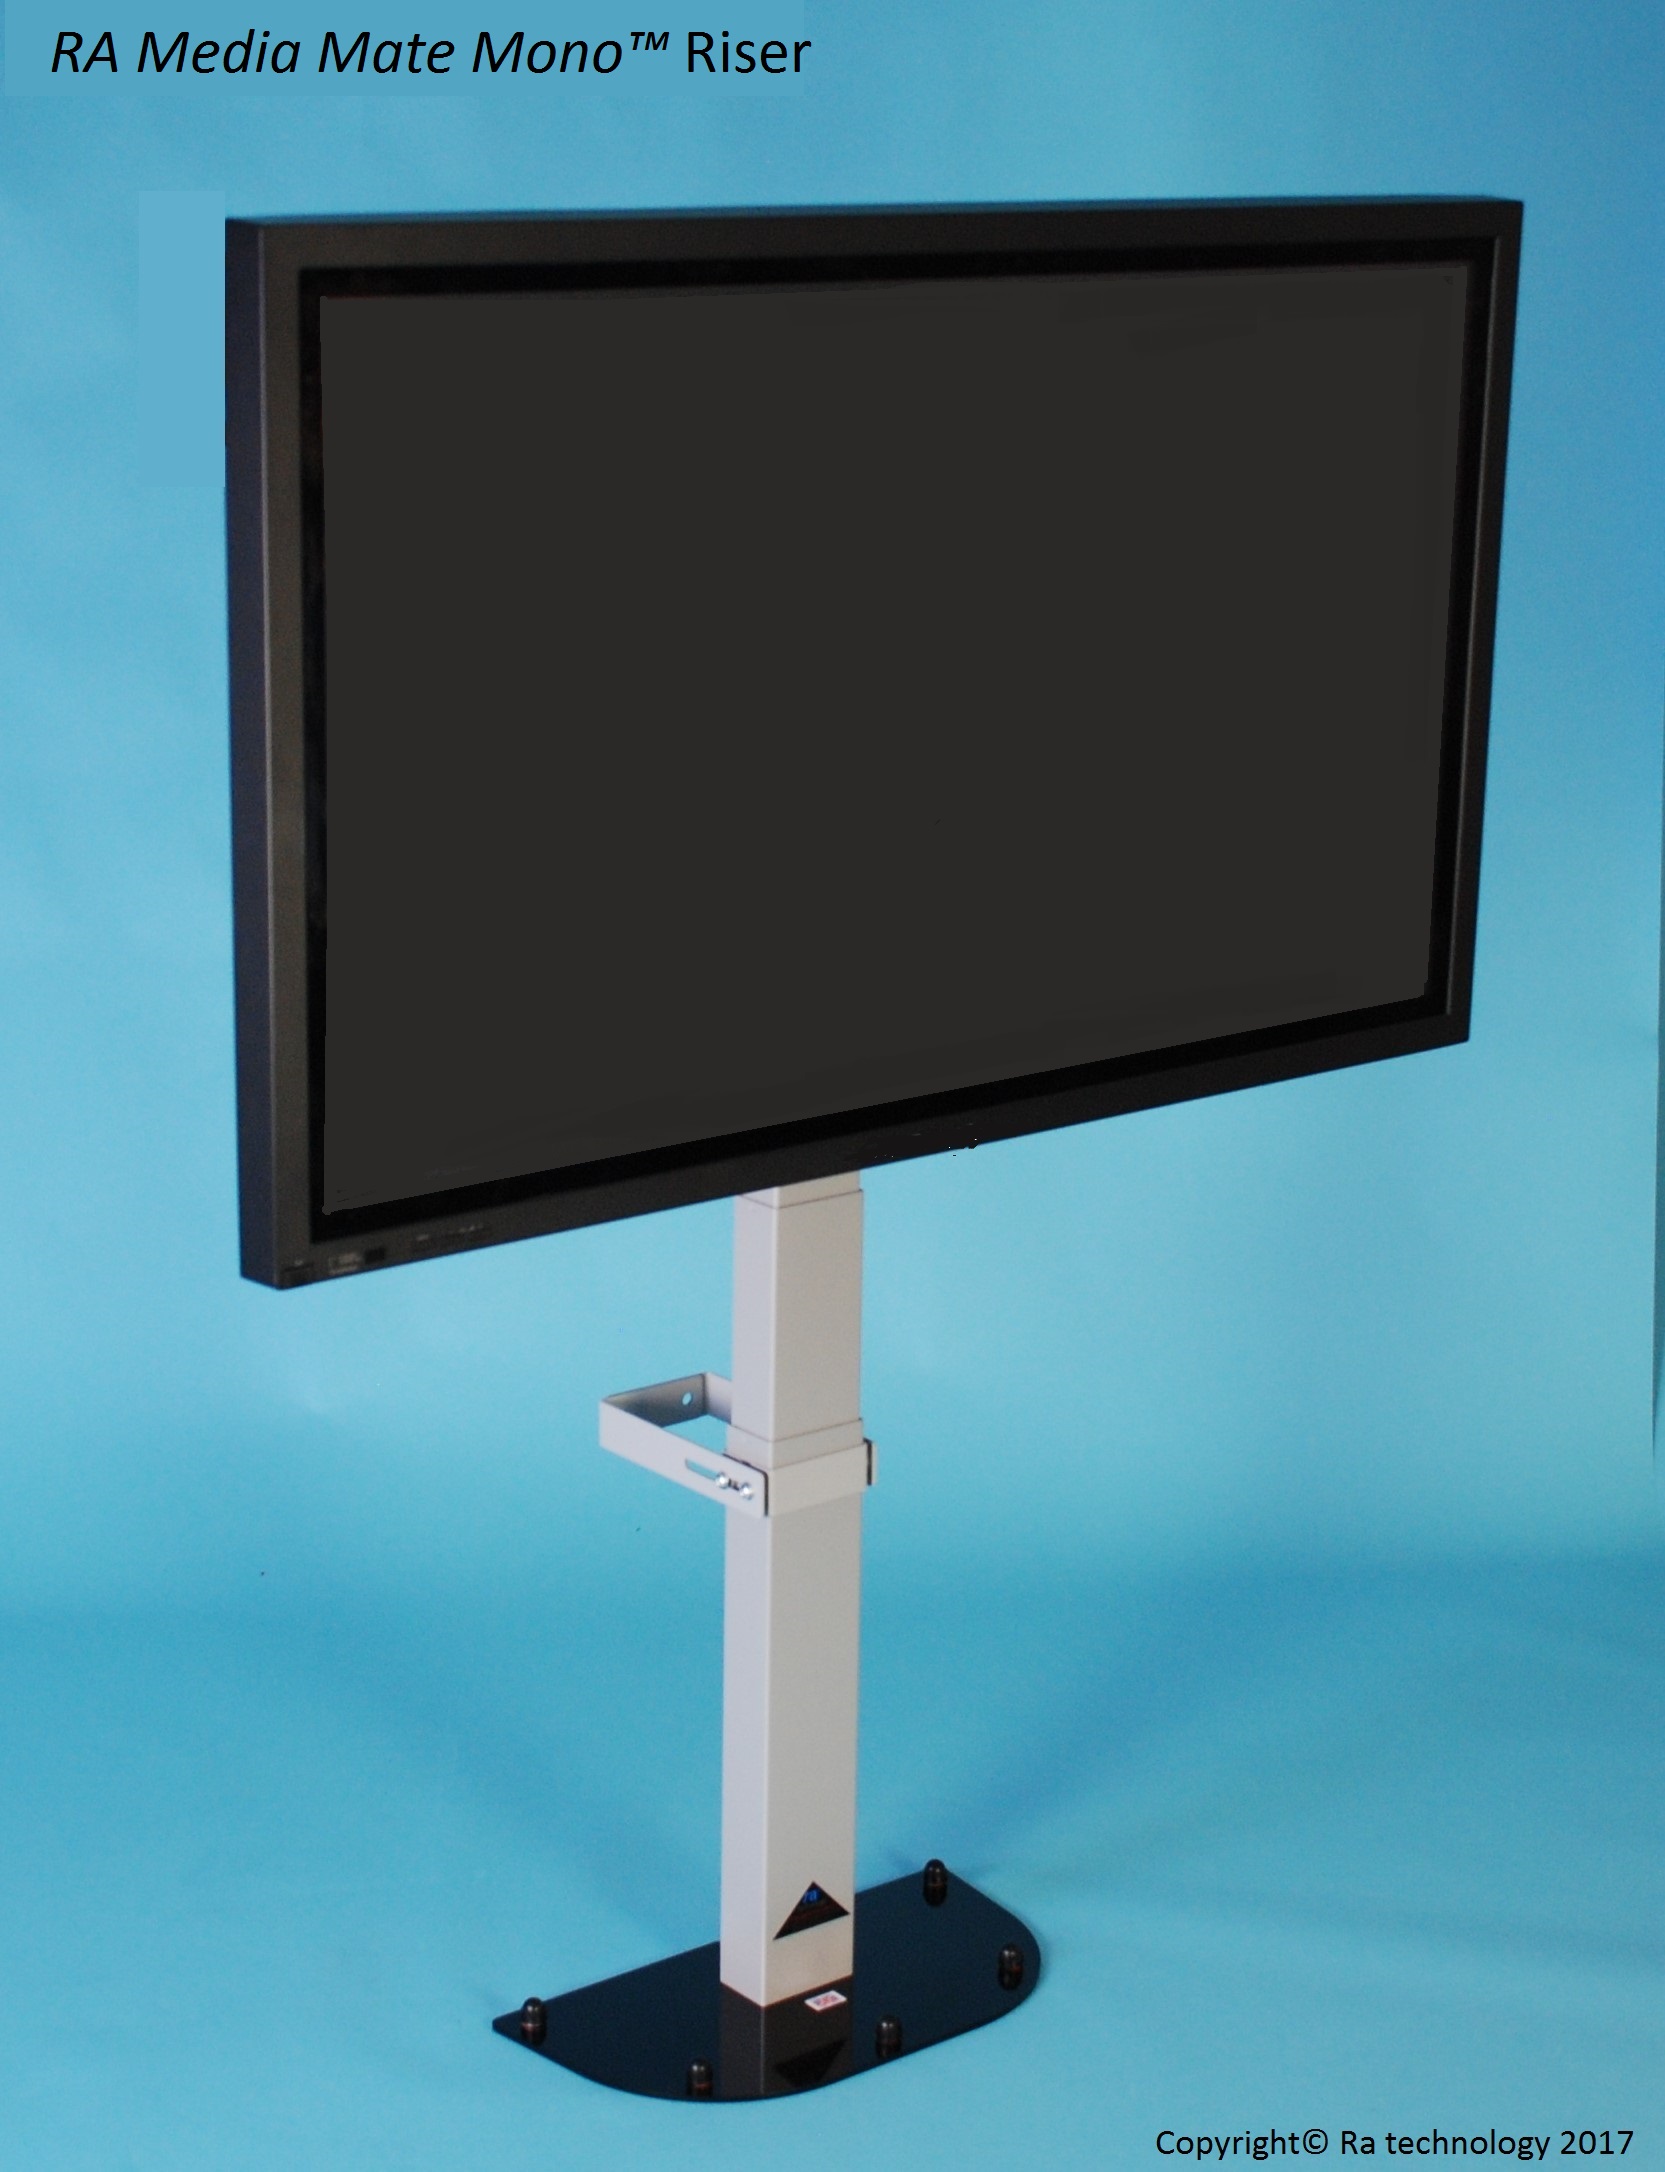 RA Media Mate Mono Riser. Screens up to 55 inch and 45kg